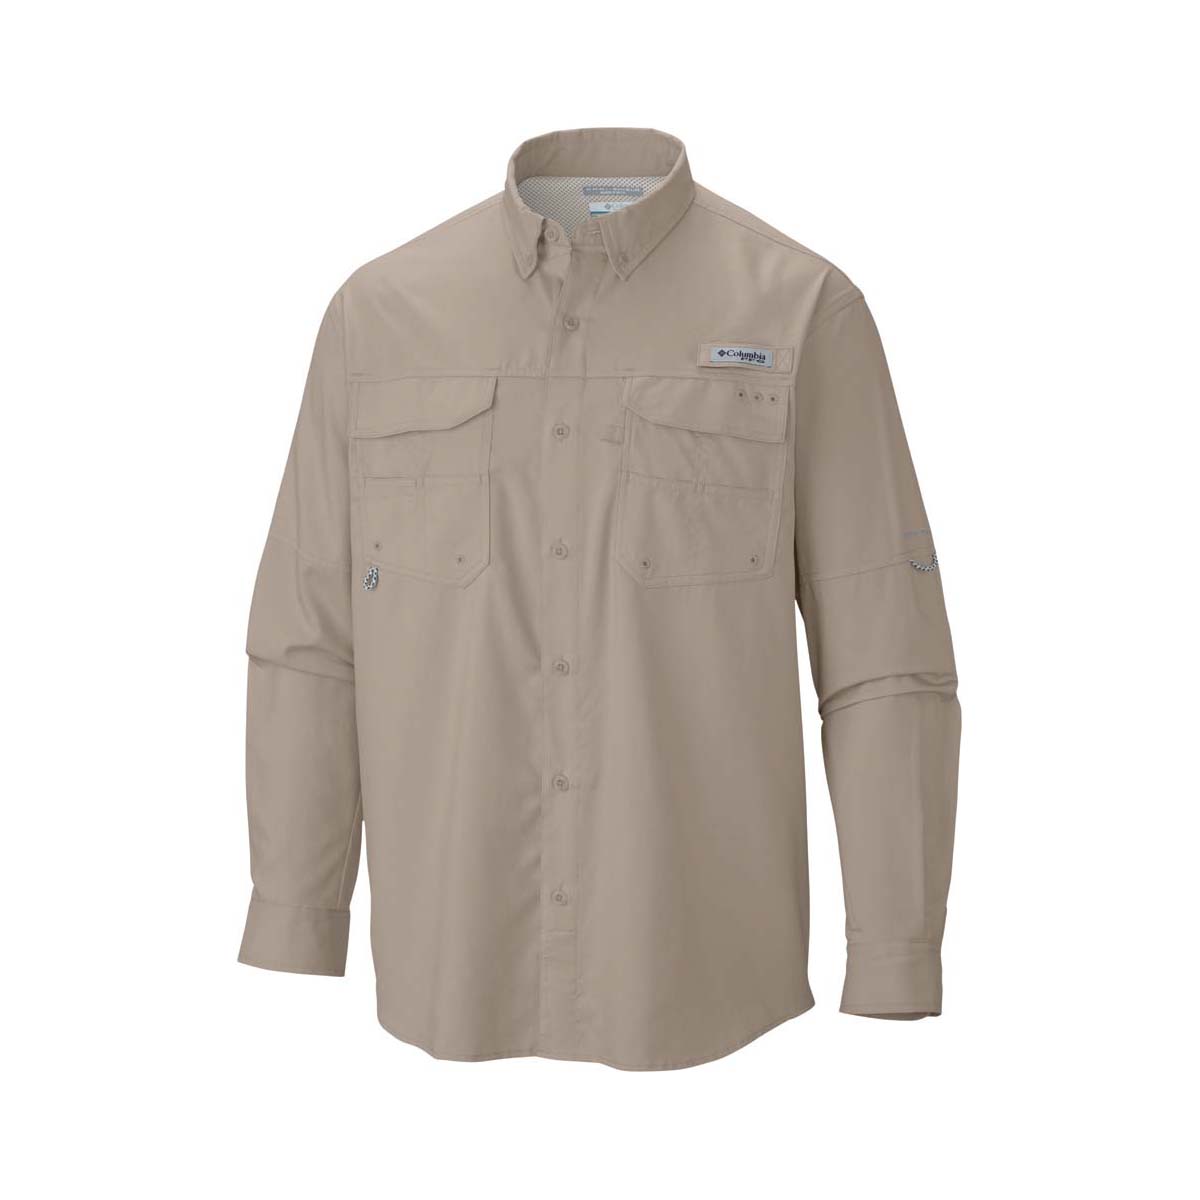 Columbia Men's Blood and Guts IV Long Sleeve Fishing Shirt Fossil M